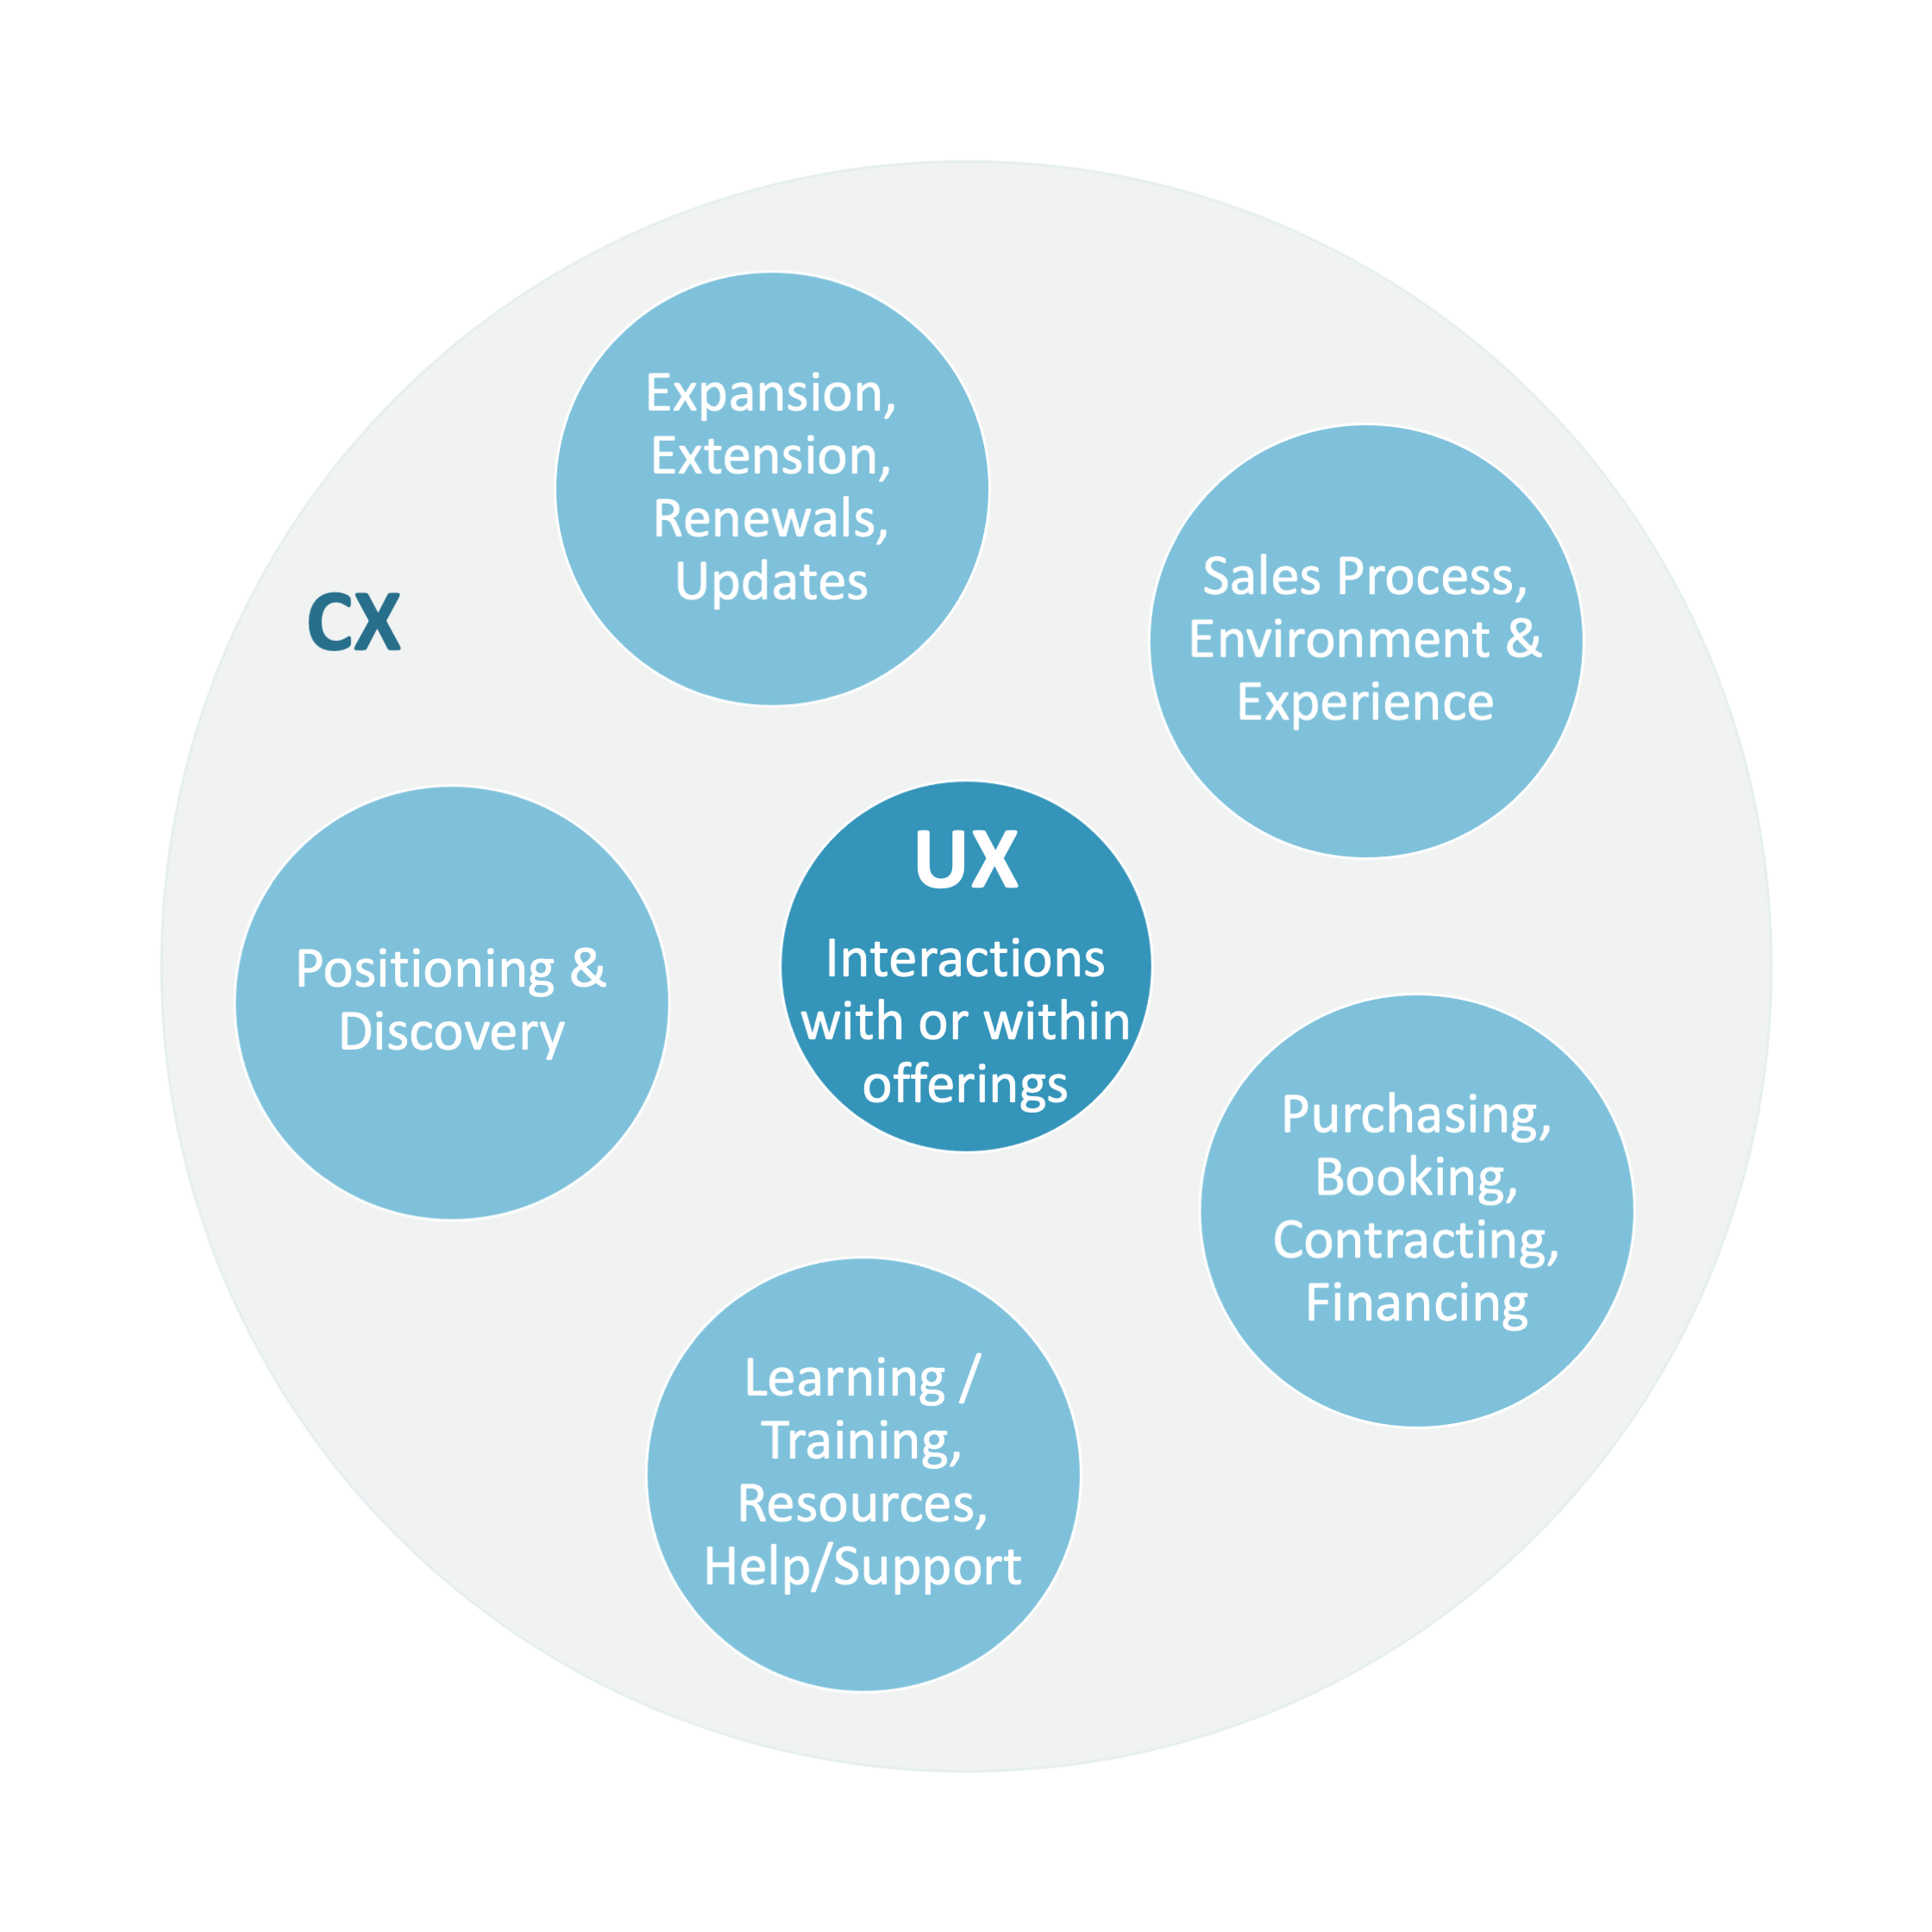 Diagram of the User Experience (UX) identified at the center of the Customer Experience (CX) which includes other steps in a CX like sales, training, purchasing.